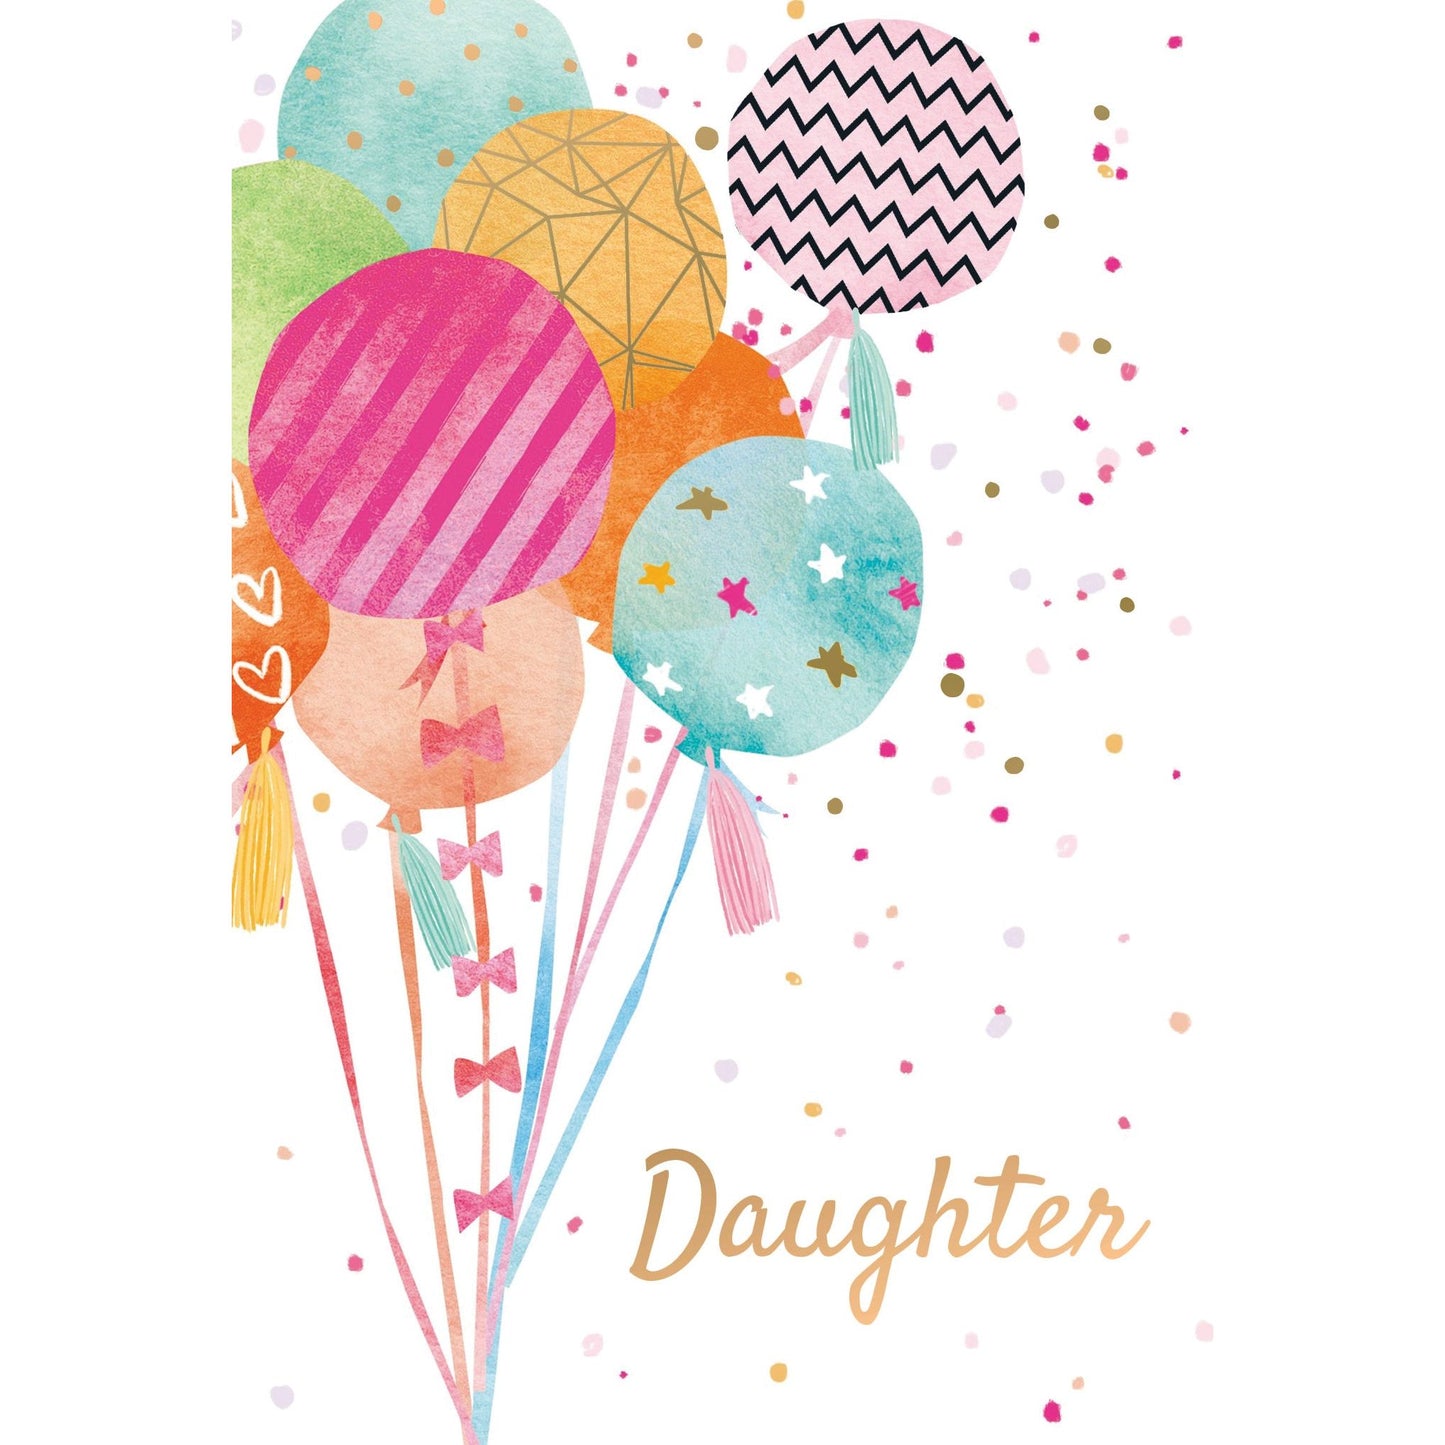 Birthday Daughter Card Balloons And Ribbons - Cardmore